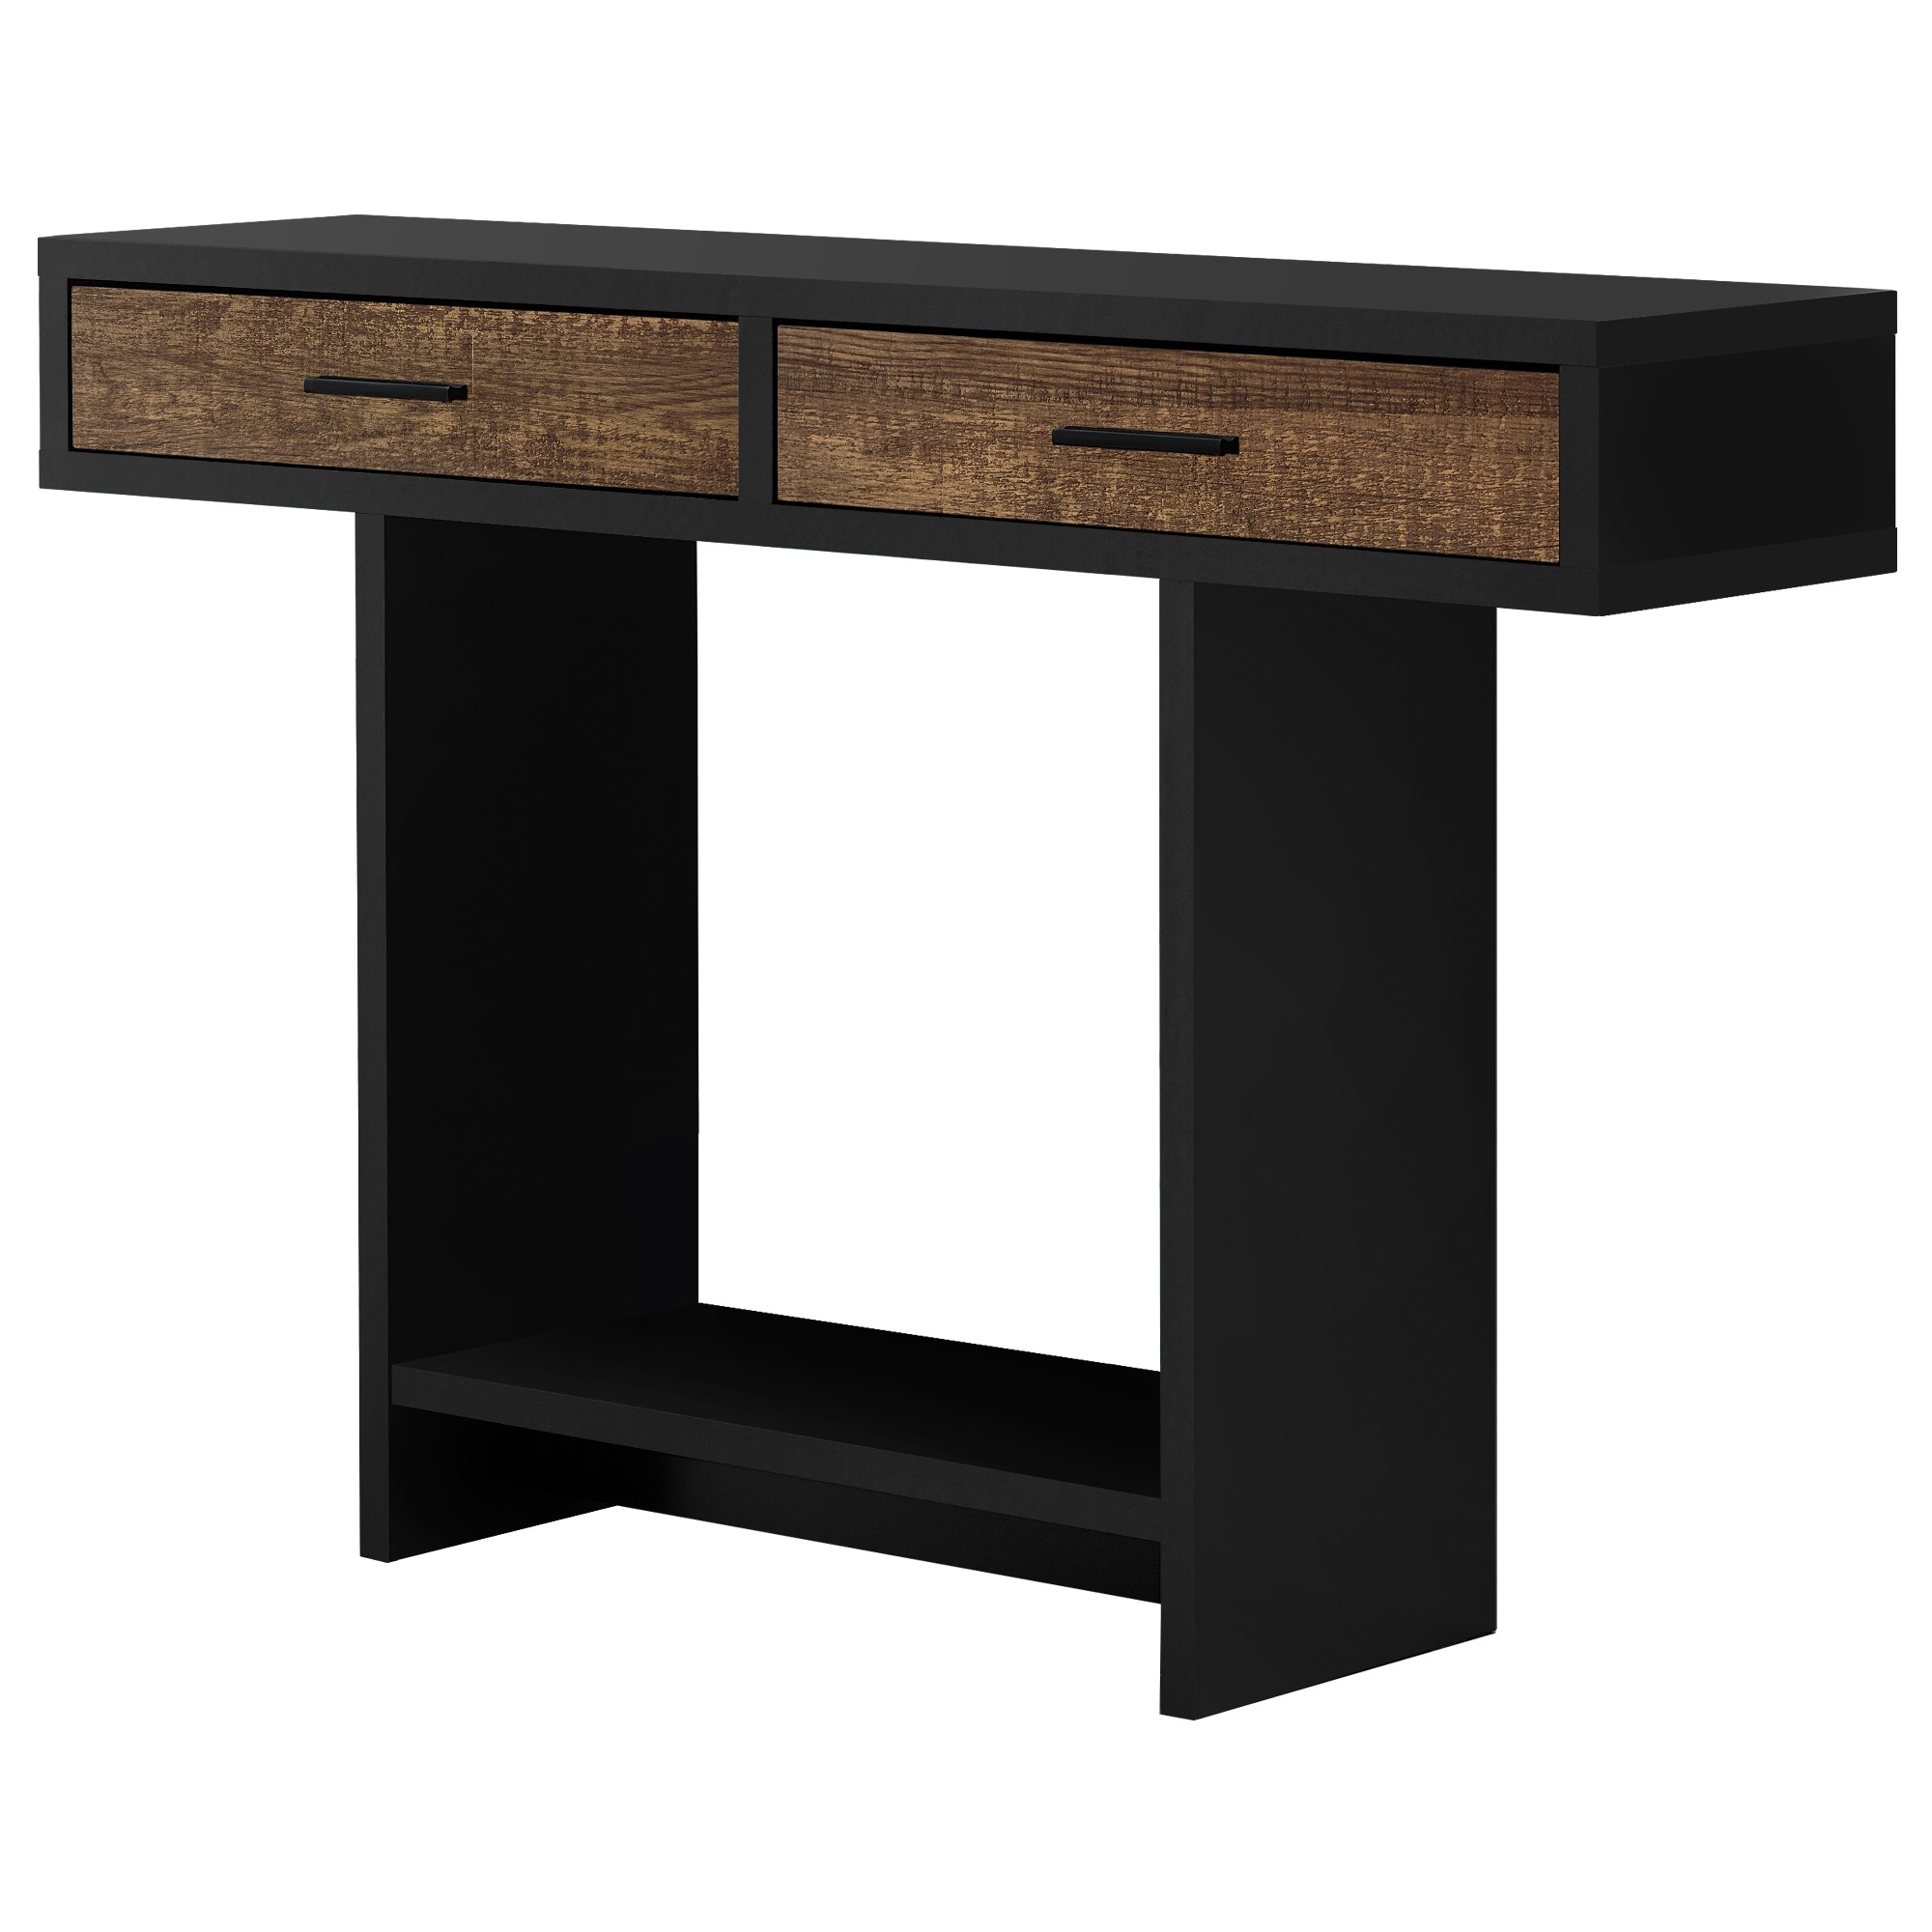 12.25" x 47.25" x 32" Black Brown Particle Board Hollow Core Accent Table with 2 Drawers